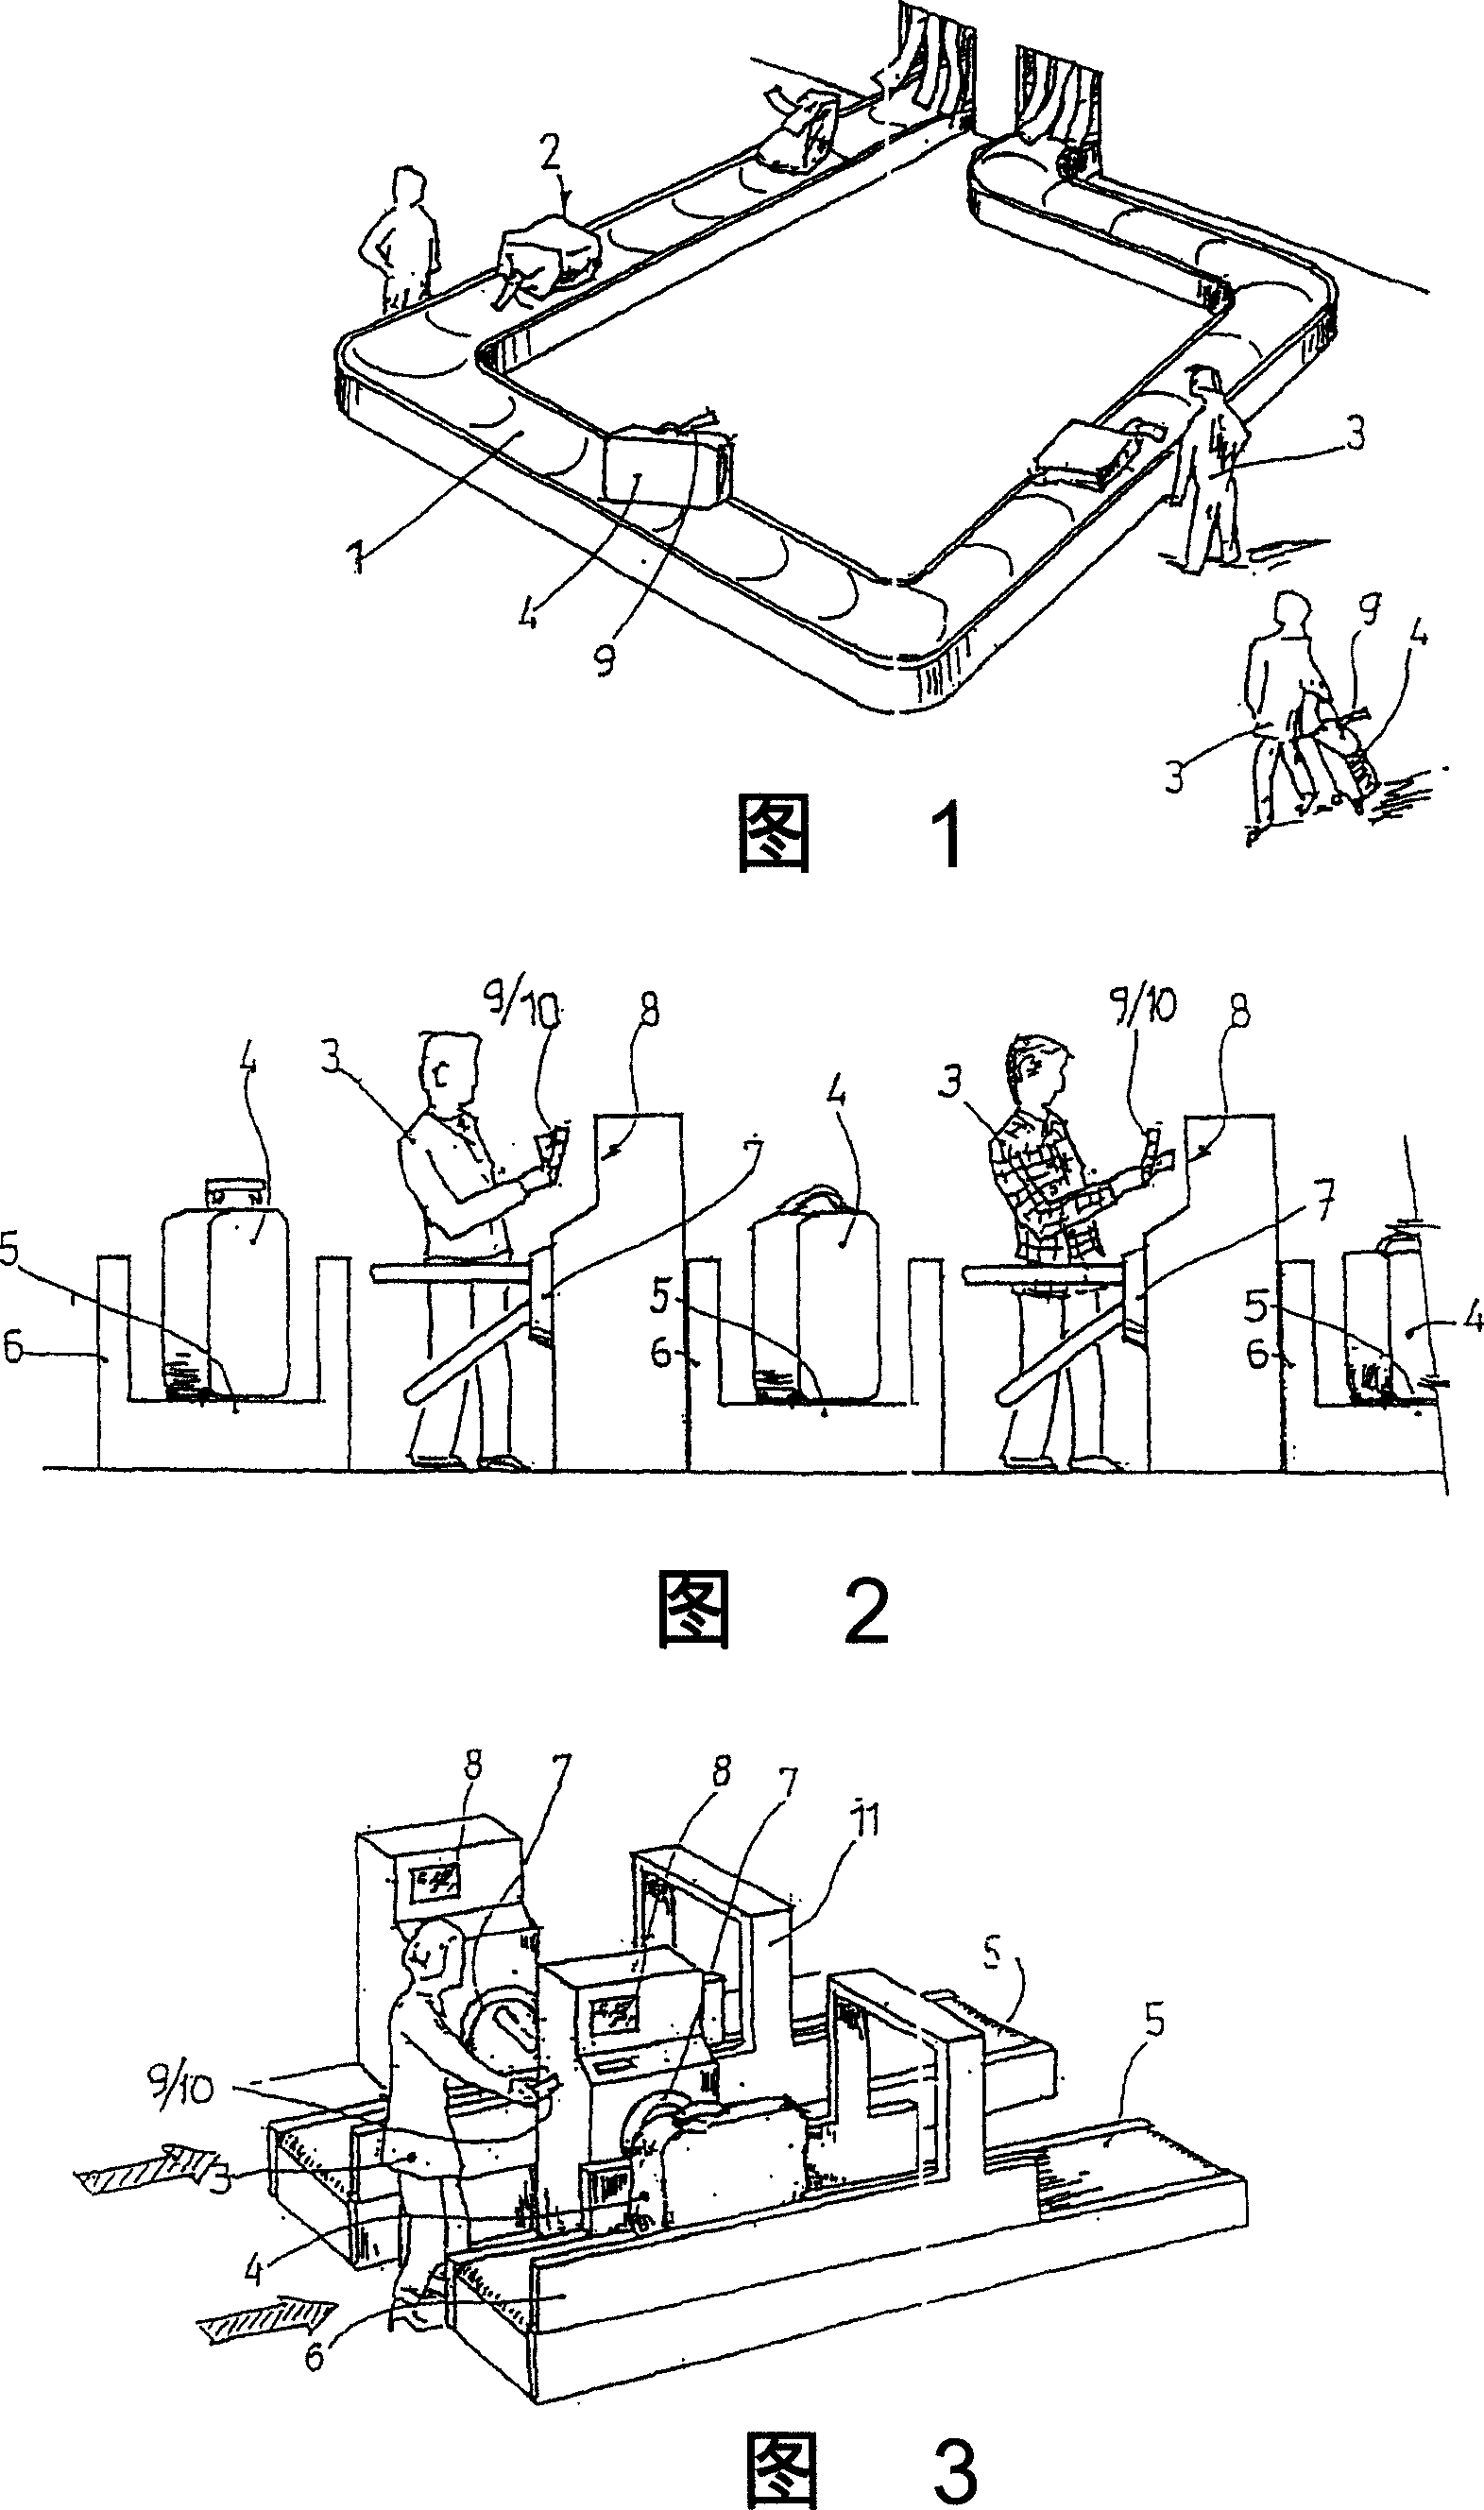 Control device for exiting of travelers with their luggage